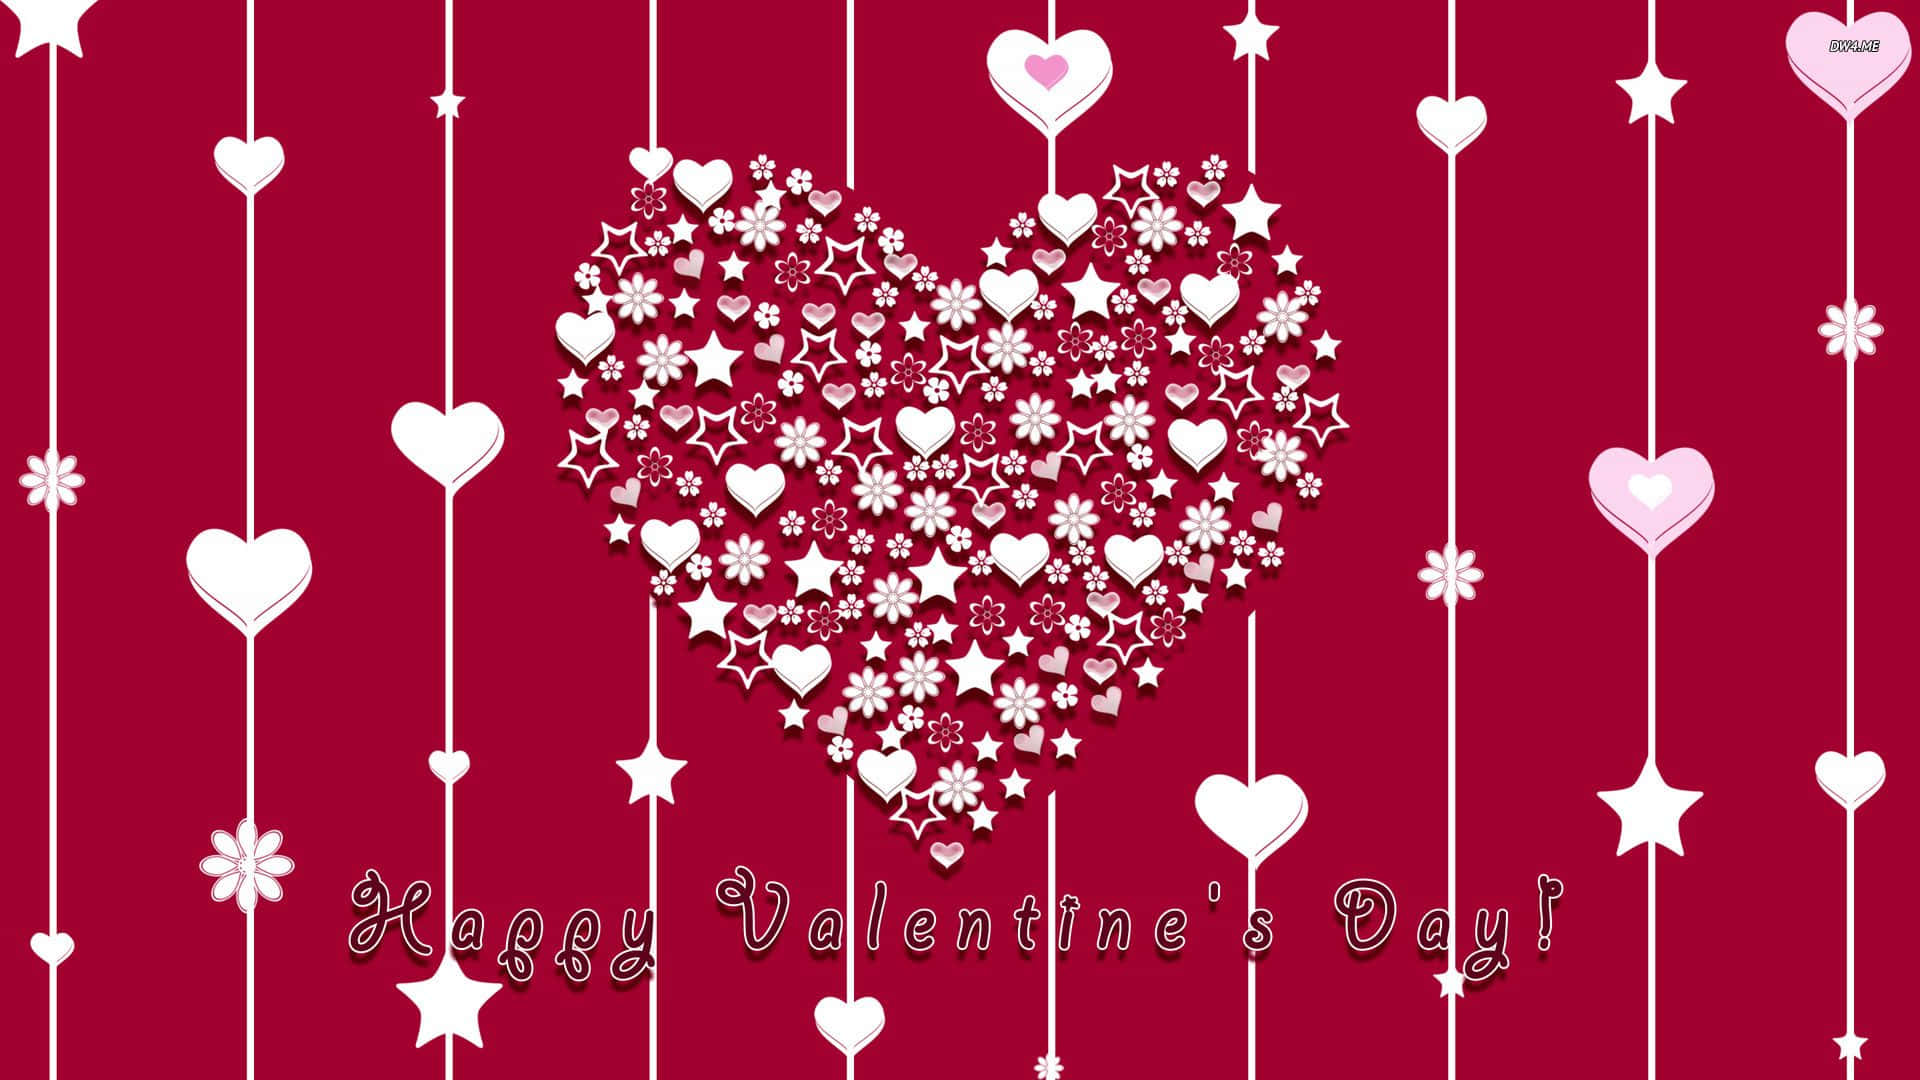 Download Spread The Love This Valentine S Day Wallpapers Com